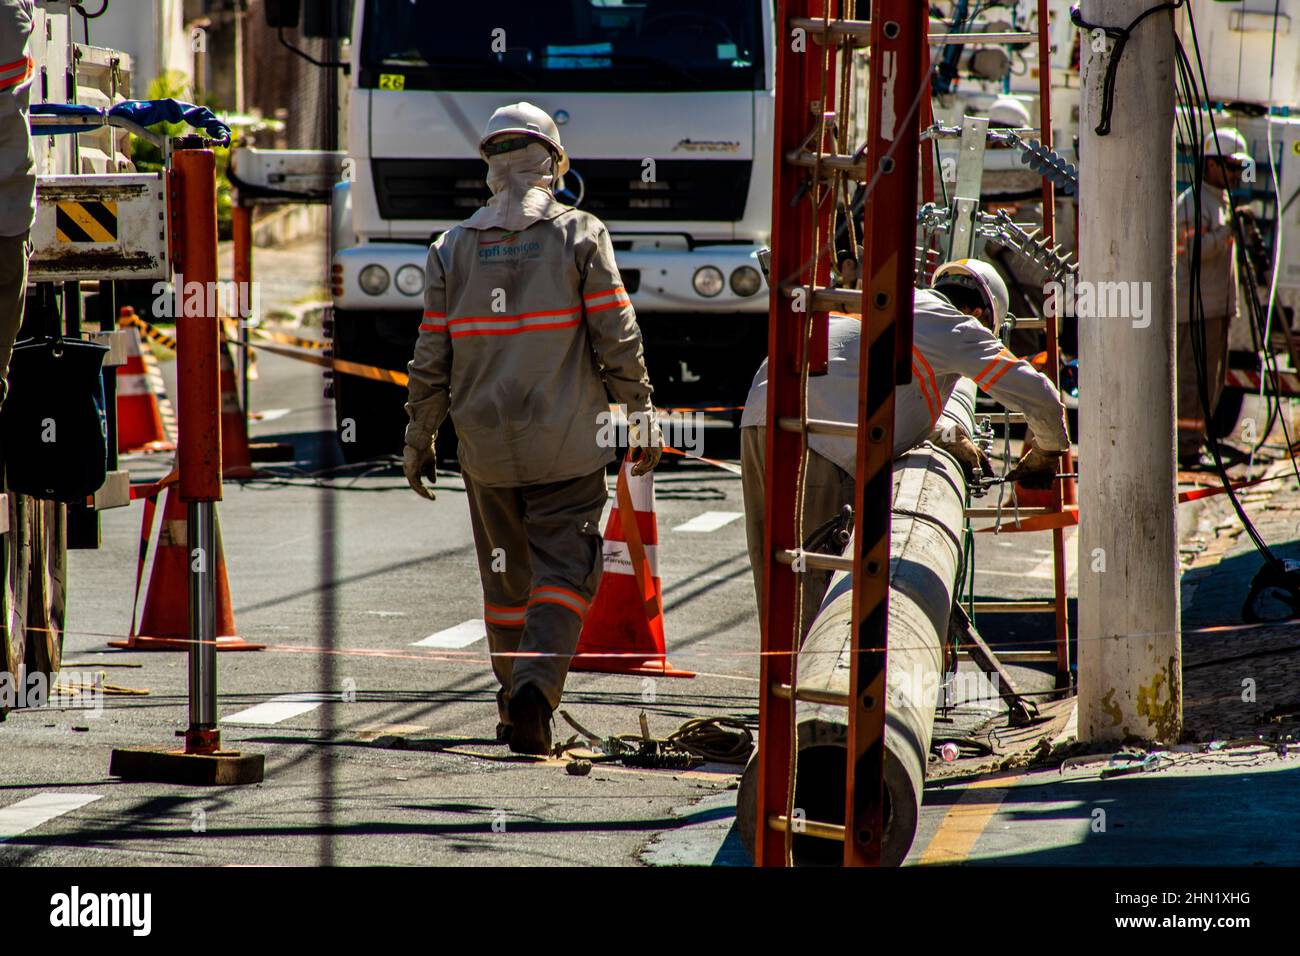 Marília, São Paulo, Brazil, May 26, 2019 Workers change poles and maintain the power grid on a street in downtown Marília. Stock Photo